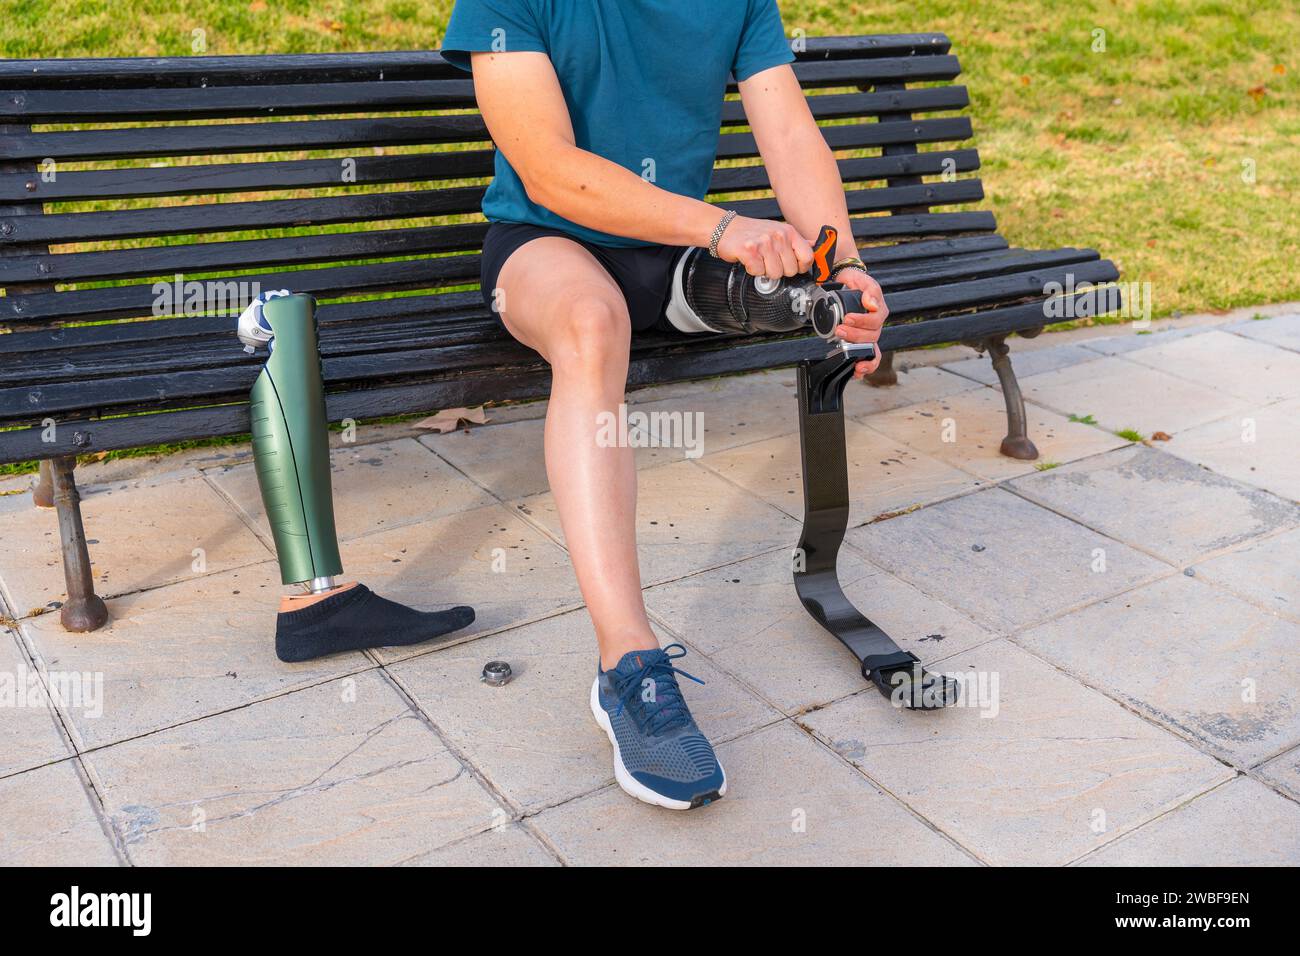 Sportsman adjusting the screws on an artificial prosthetic leg sitting on a bench before running Stock Photo